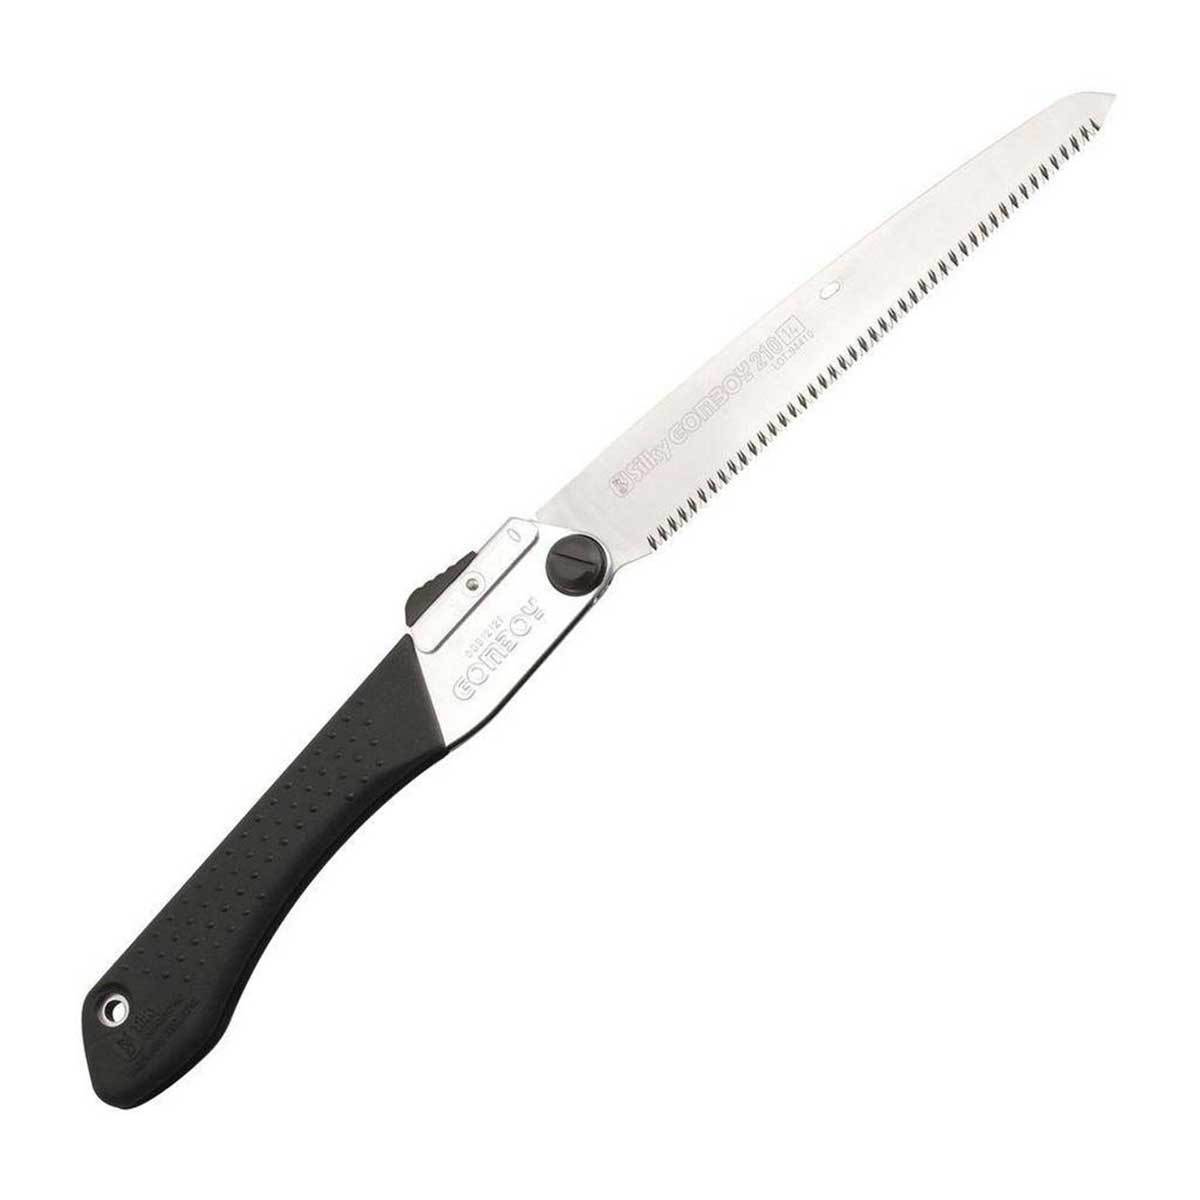 210mm Silky Gomboy folding saw, open and unfolded with fine teeth for cutting hardwoods cleanly.